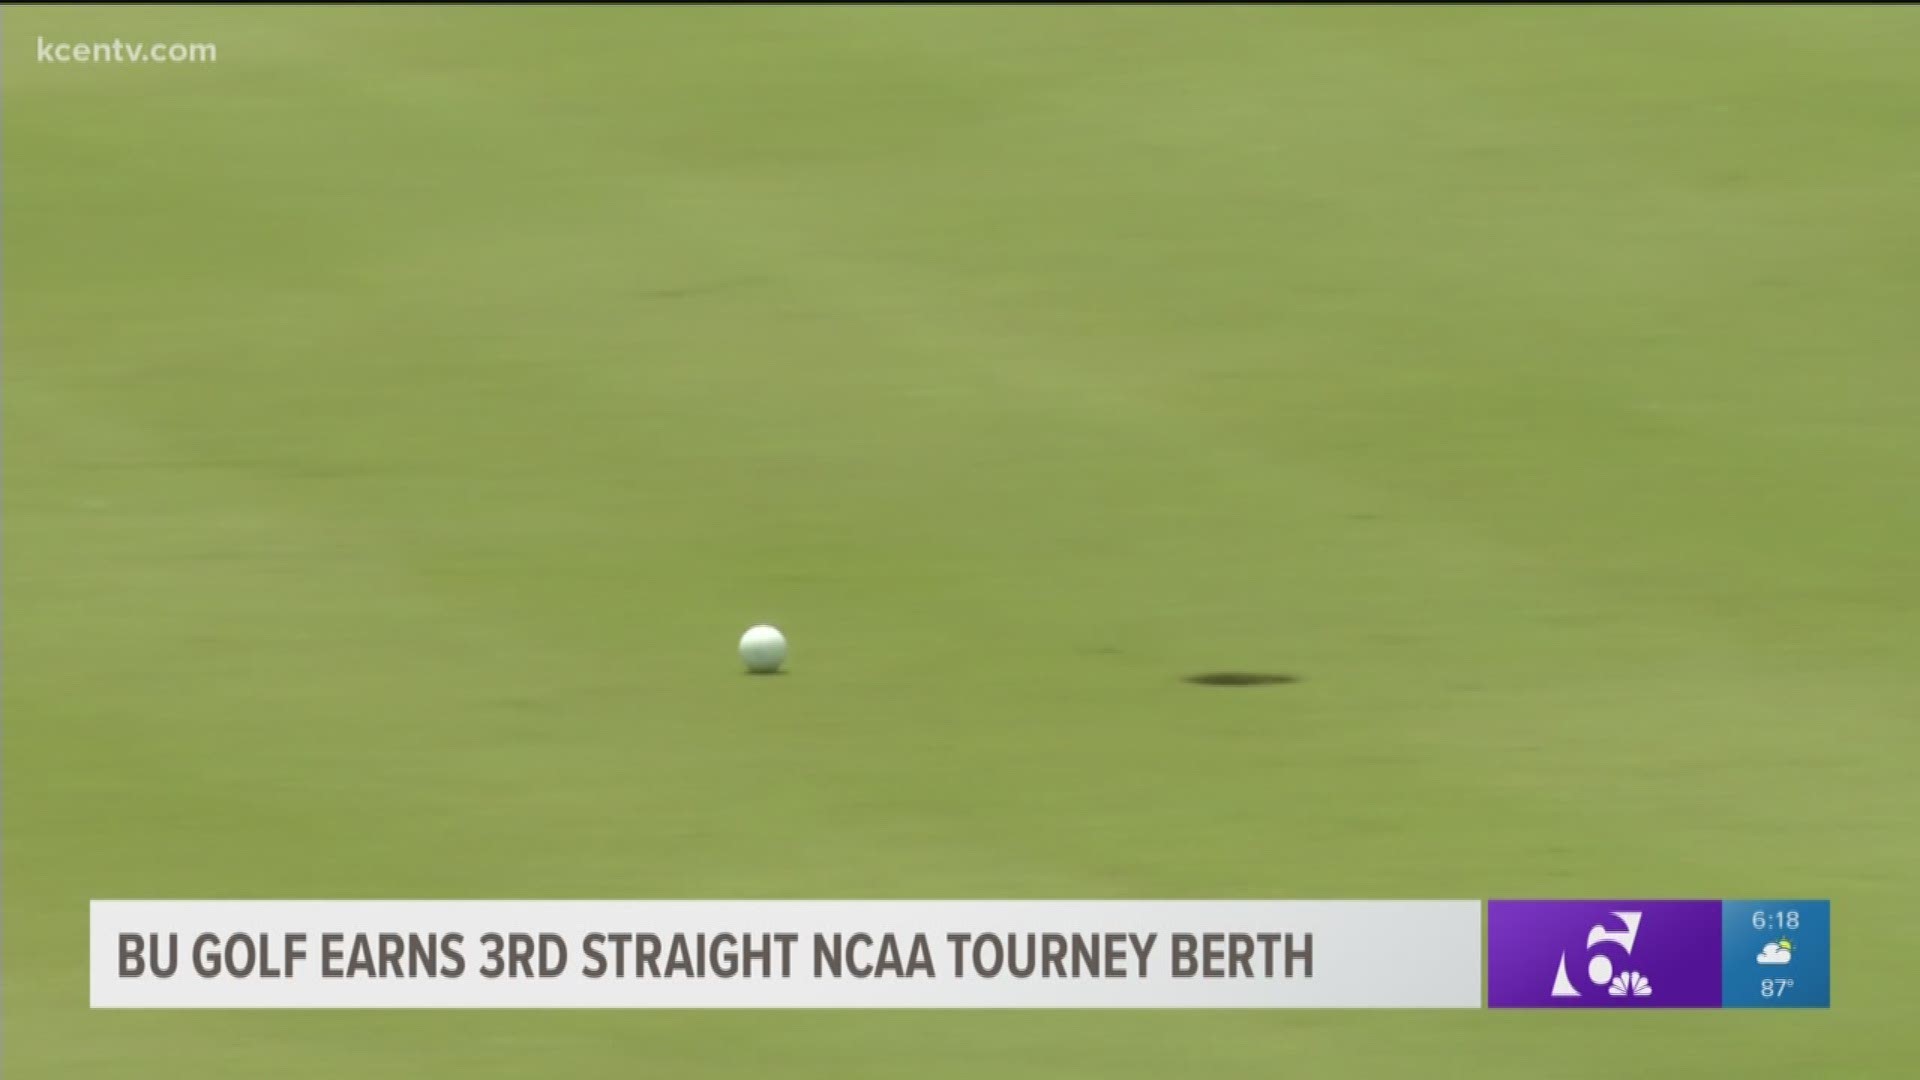 The Baylor Men's golf team is headed back to the NCAA Tournament after finishing at the NCAA Bryan Regional. 